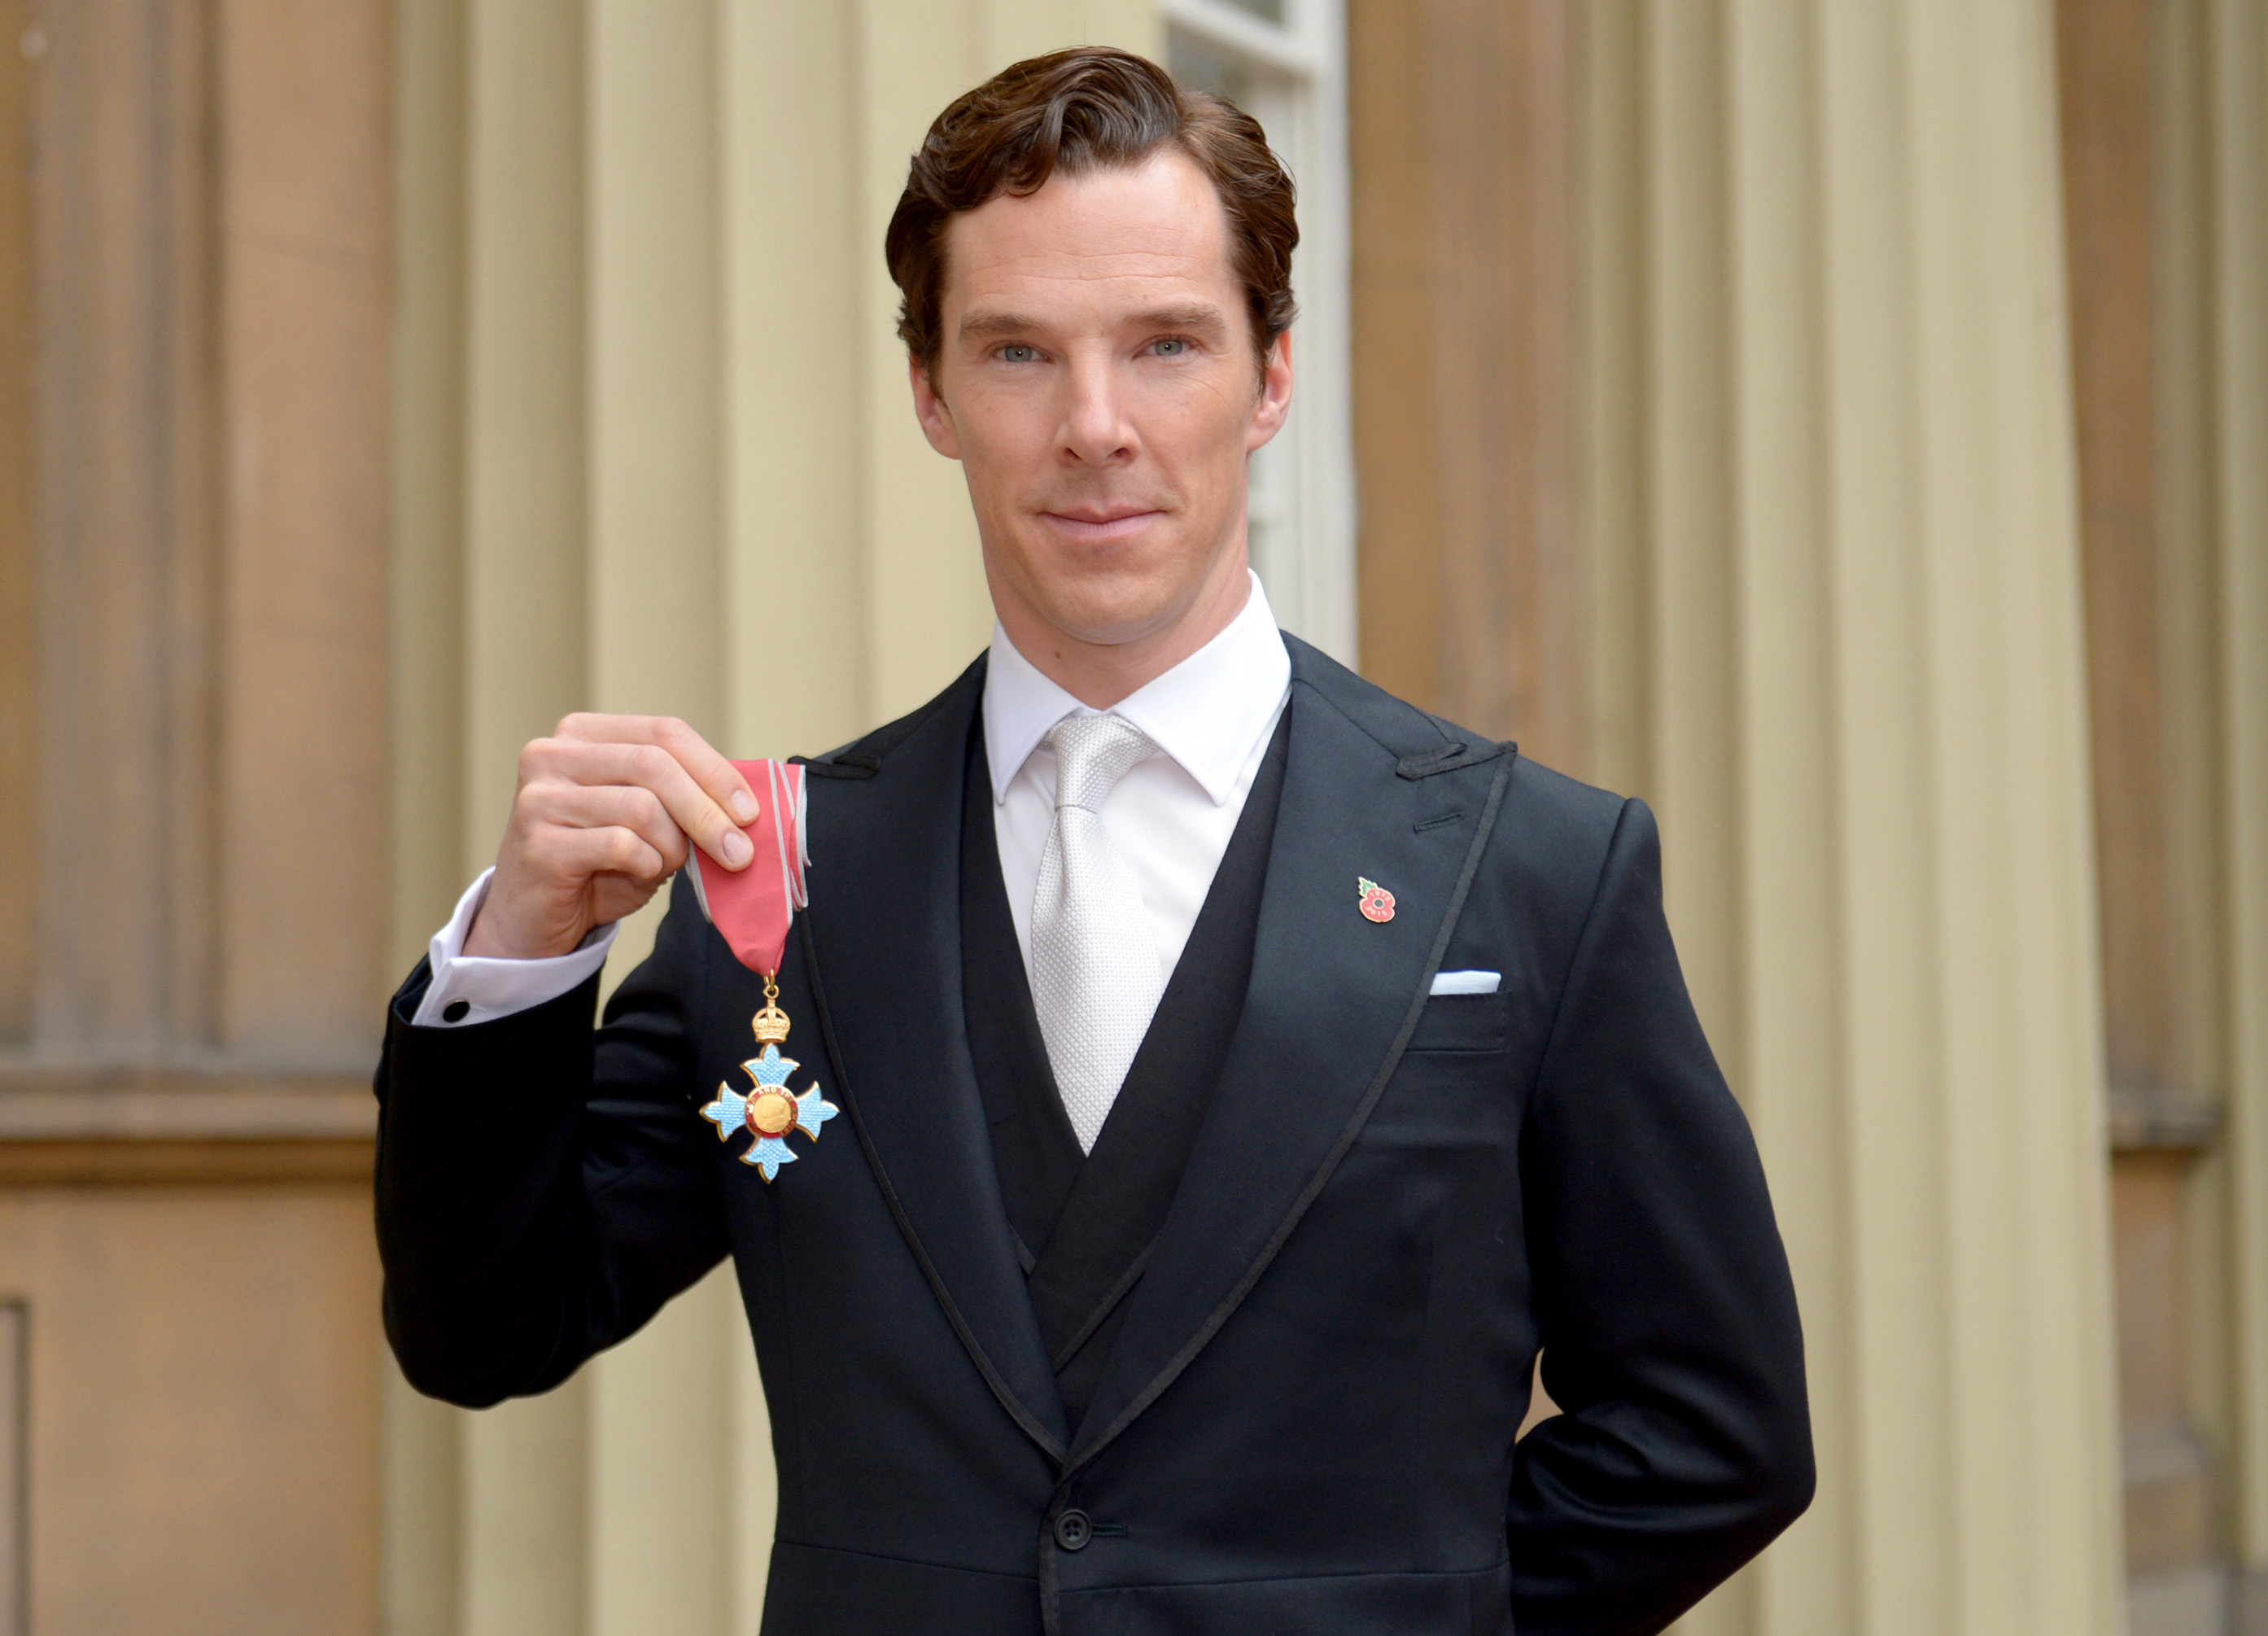 Actor Benedict Cumberbatch after receiving the CBE (Commander of the Order of the British Empire) from Queen Elizabeth II for services to the performing arts and to charity at Buckingham Palace on November 10, 2015 in London, England. (WPA Pool—Getty Images)